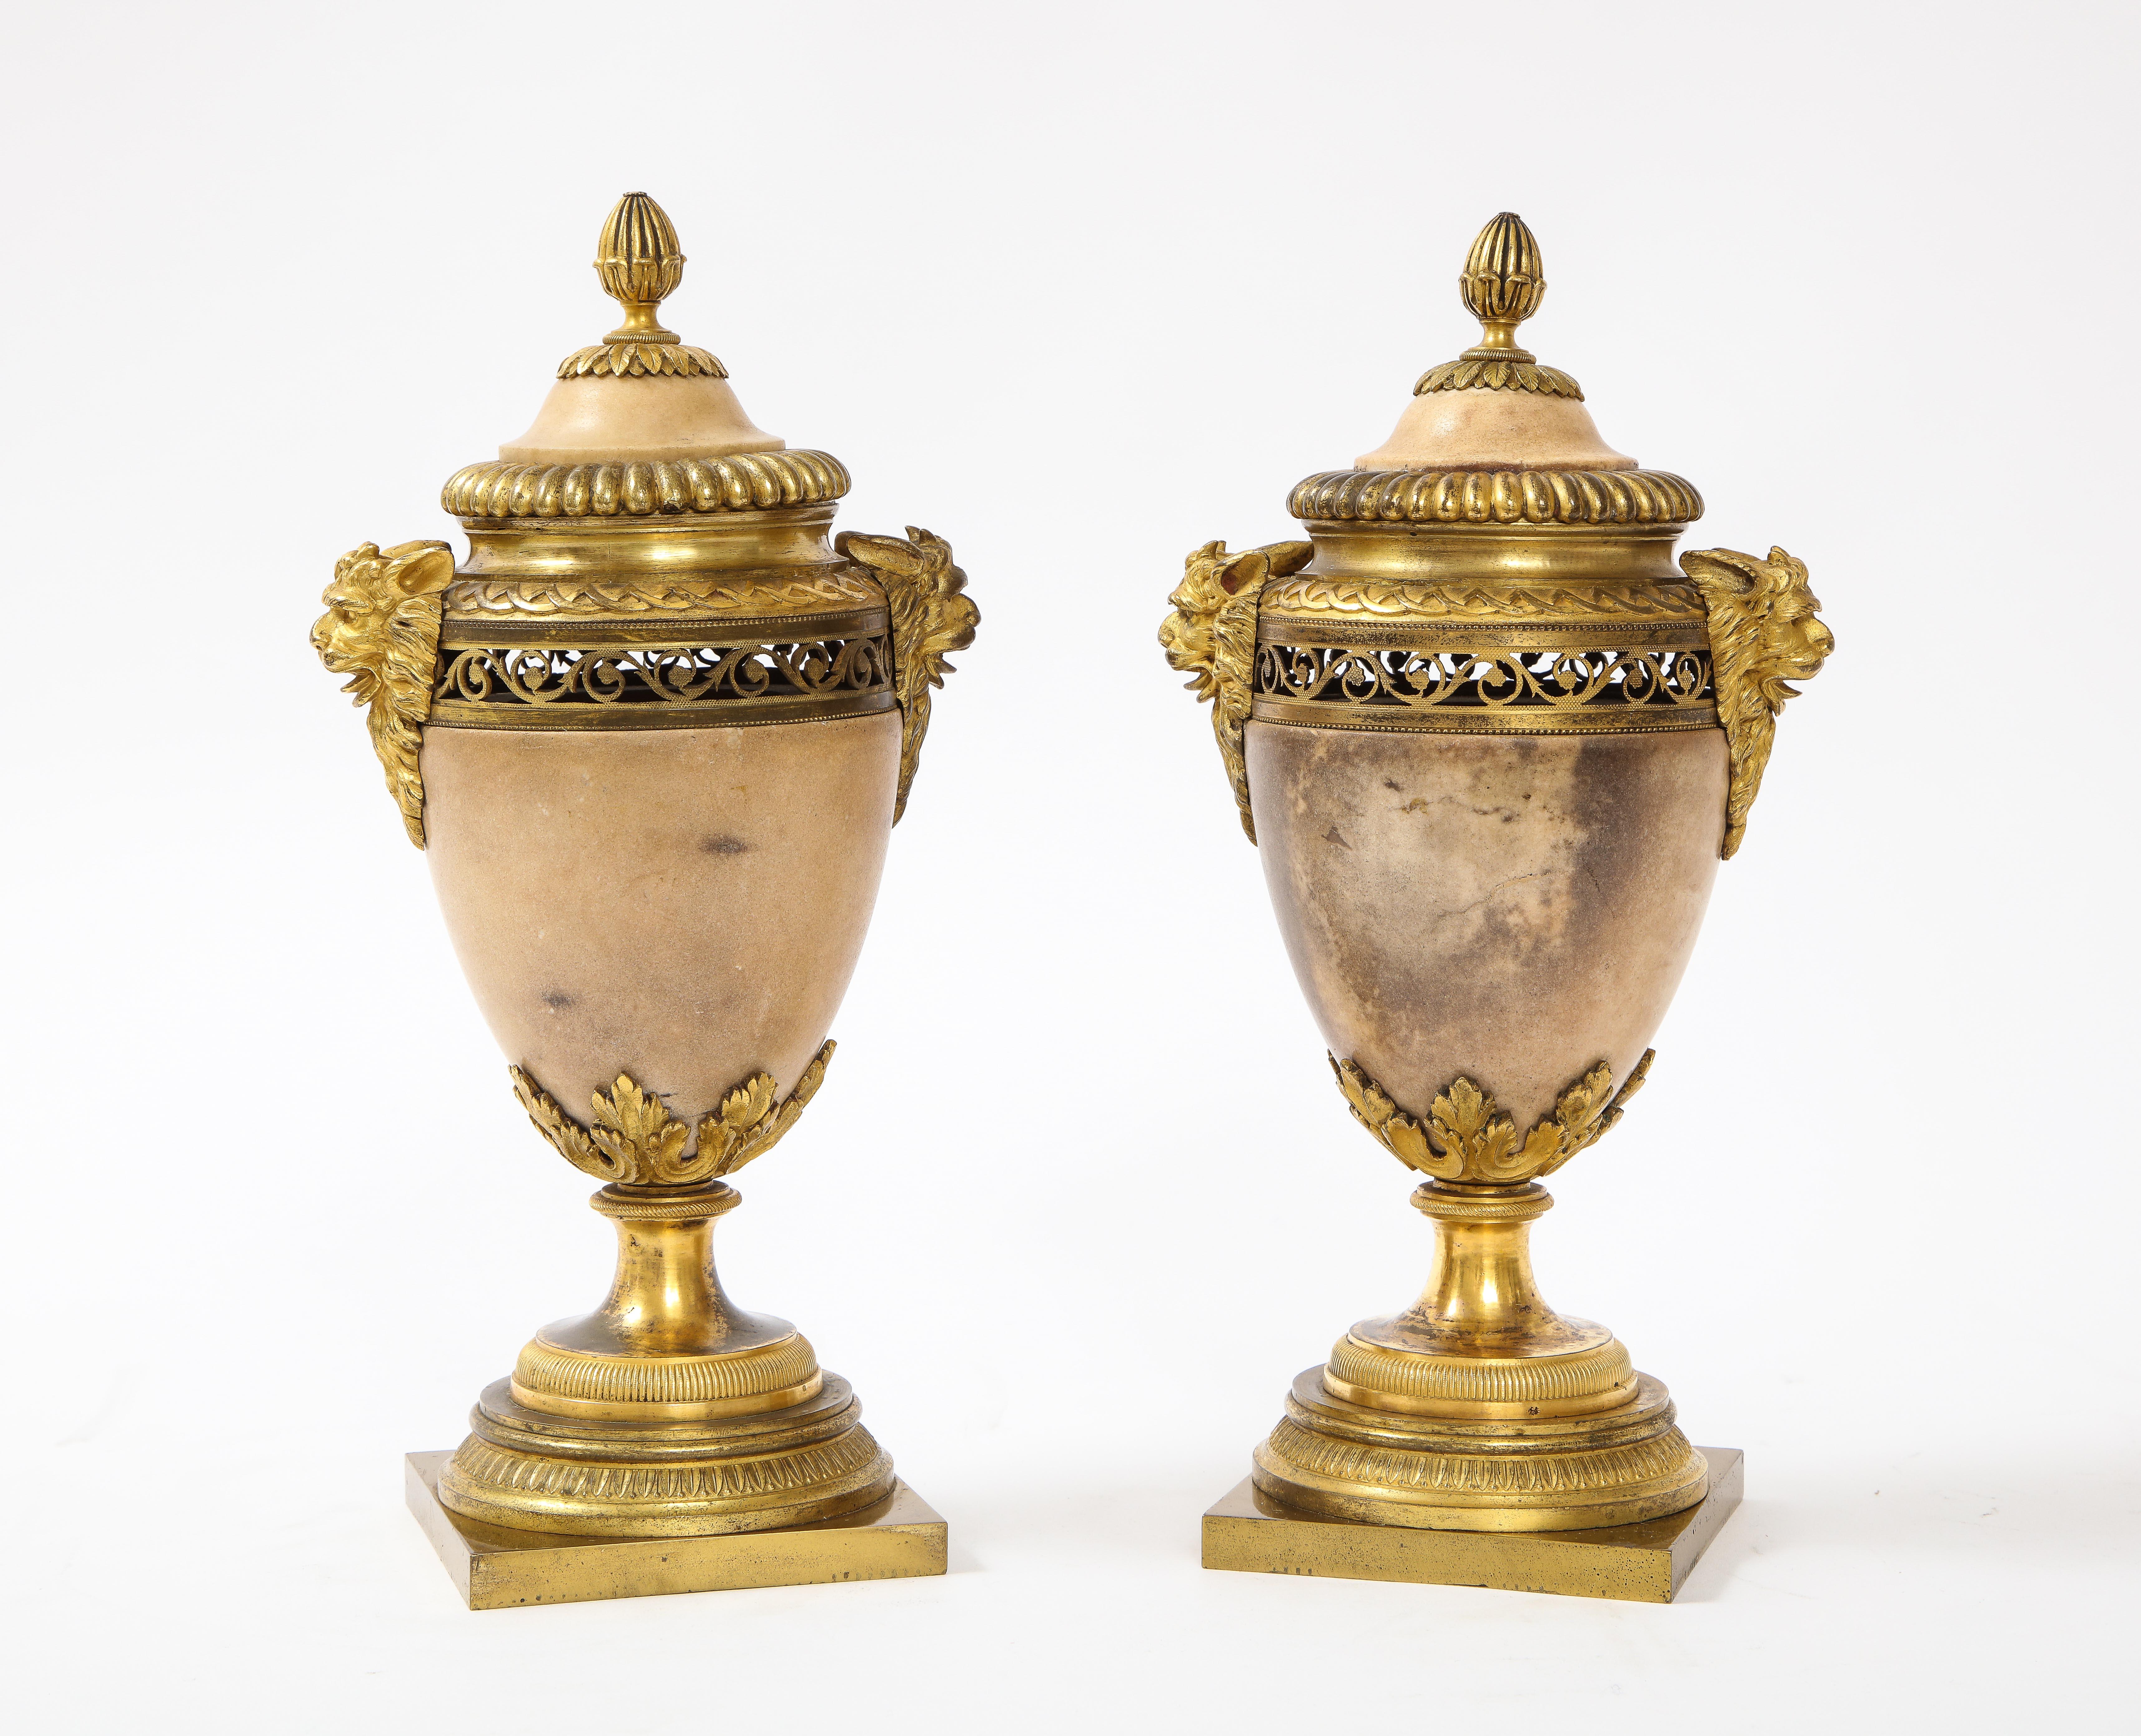 A fabulous pair of Louis XVI Northern European neoclassical ormolu mounted marble potpourris. The body of each is hand-carved from a very fine quality peach-ish-colored marble. Each side is flanked with exceptionally cast, hand-chassed, and